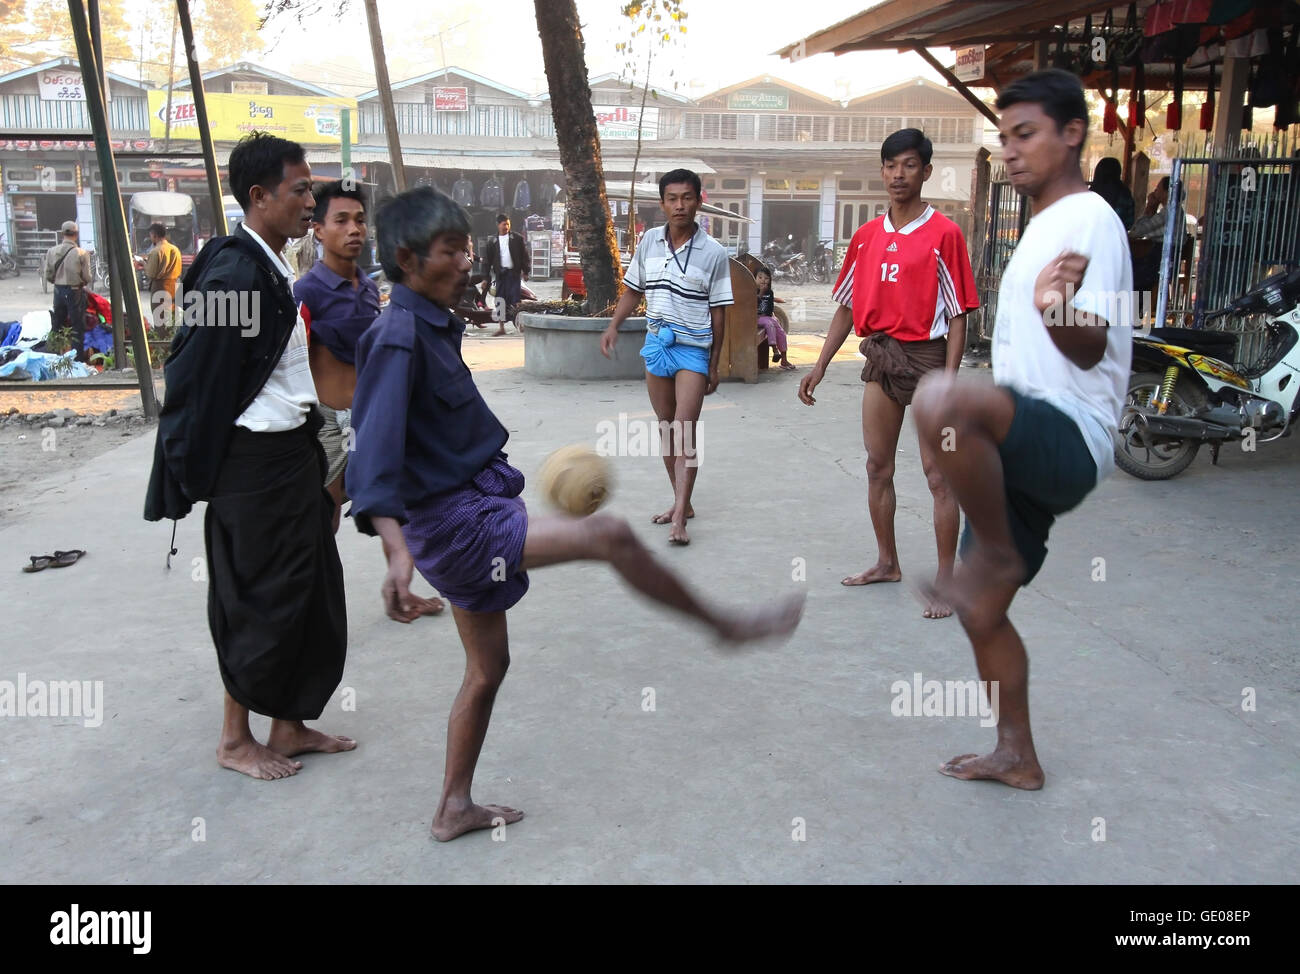 Men playing ball on the street of Myitkyina. In Burma 36 percent of the population live below the poverty line. Stock Photo